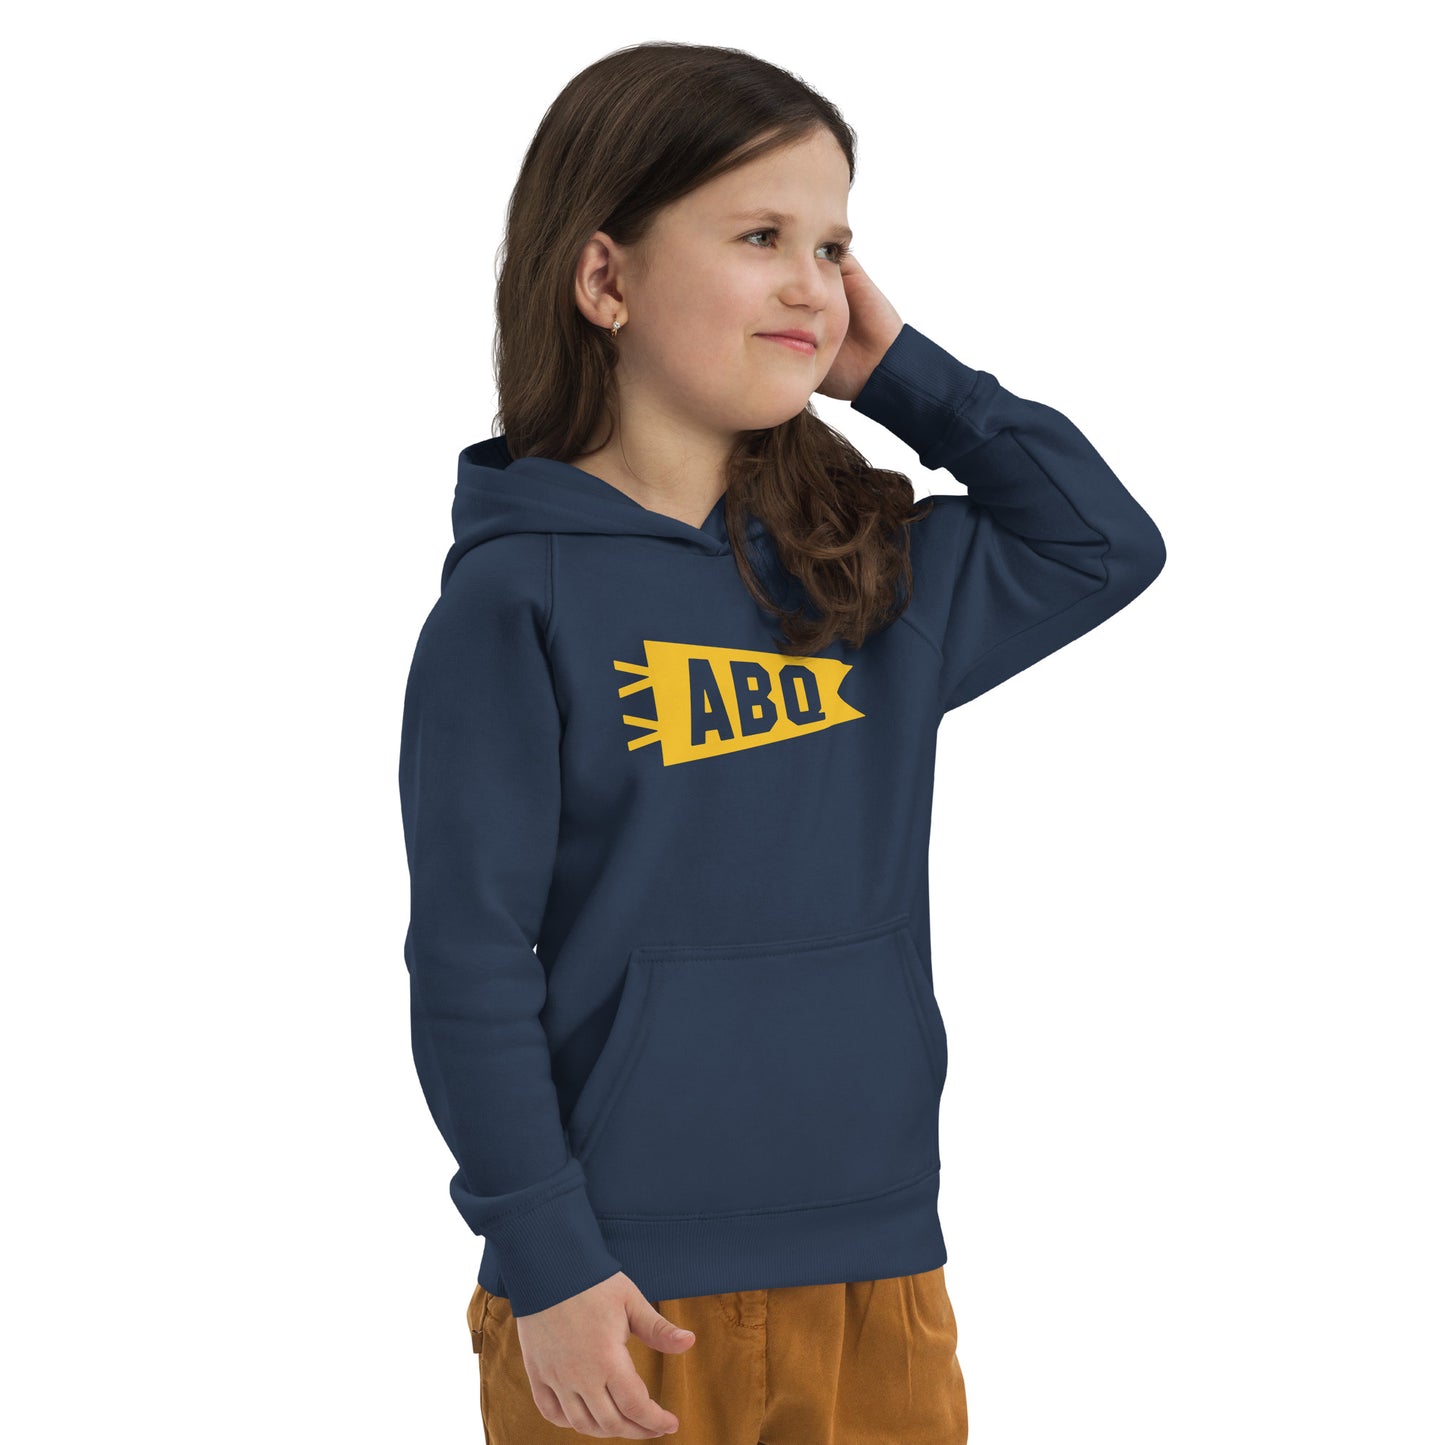 Kid's Sustainable Hoodie - Yellow Graphic • ABQ Albuquerque • YHM Designs - Image 06